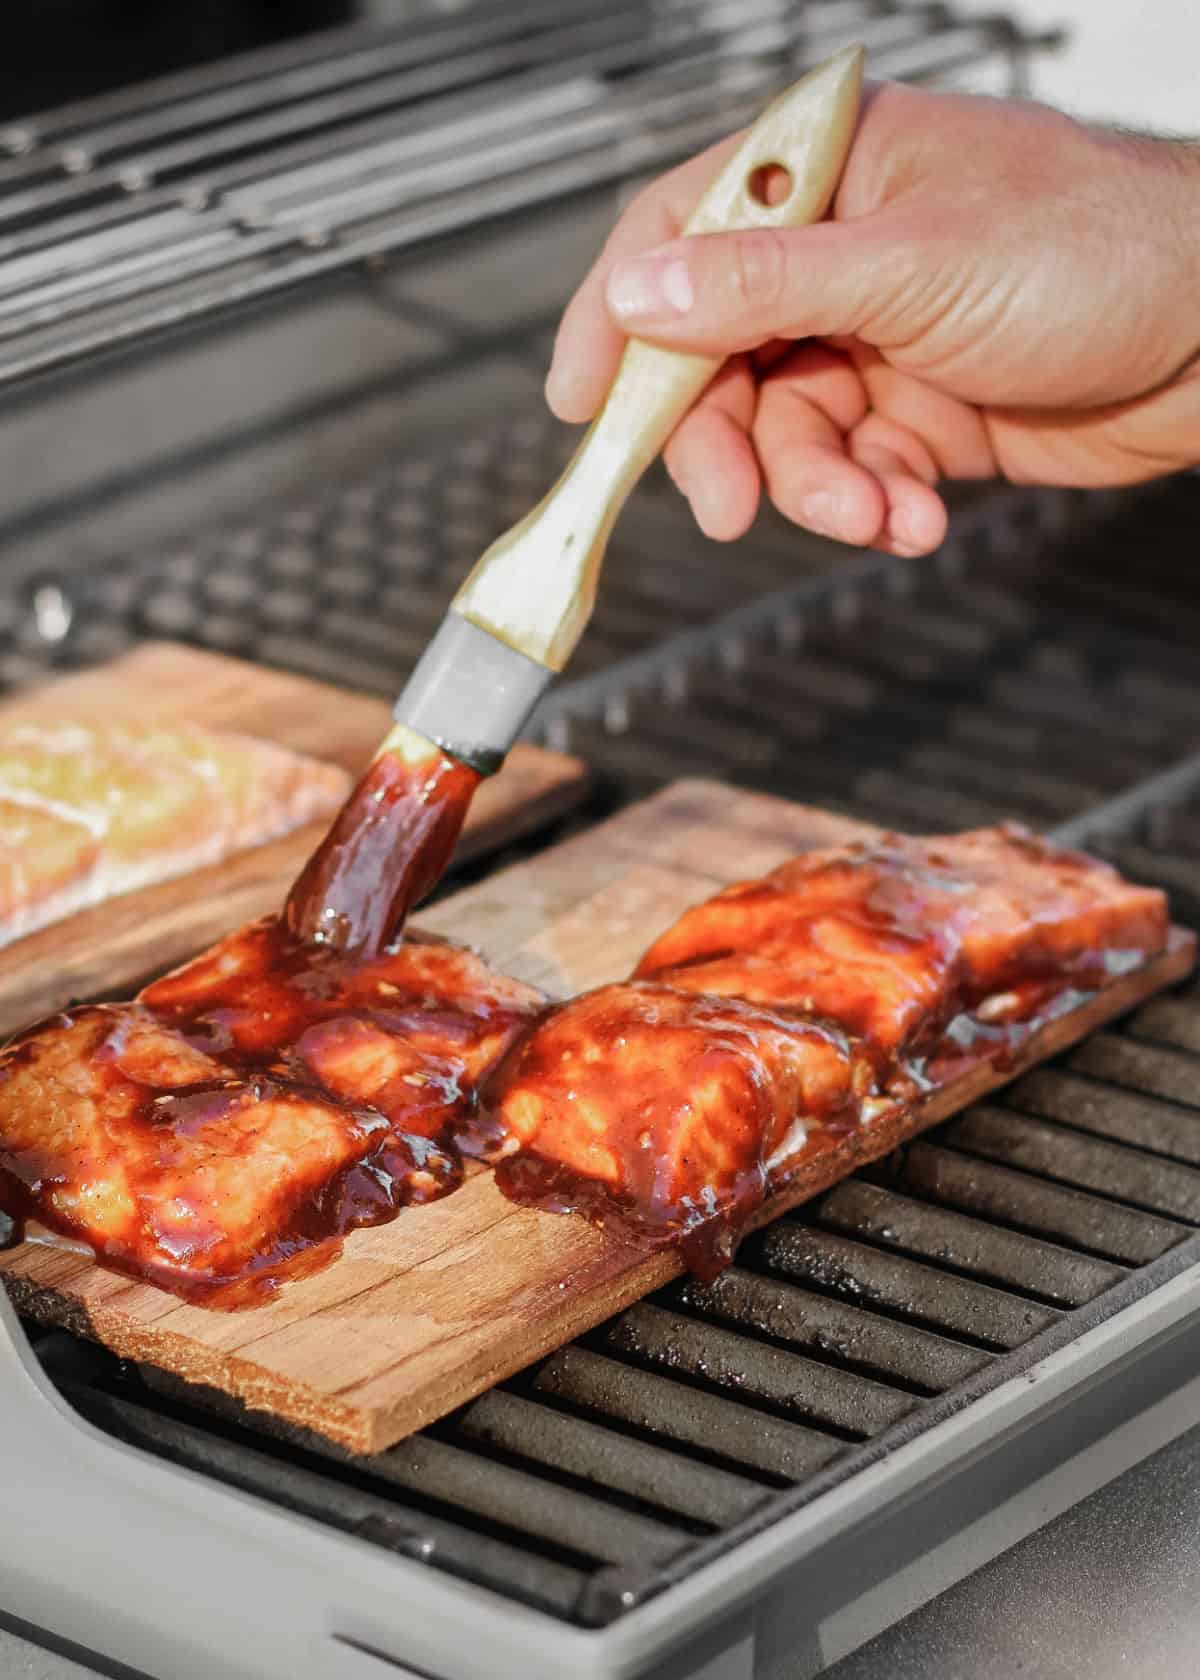 hand brushing sauce on salmon on planks on grill.